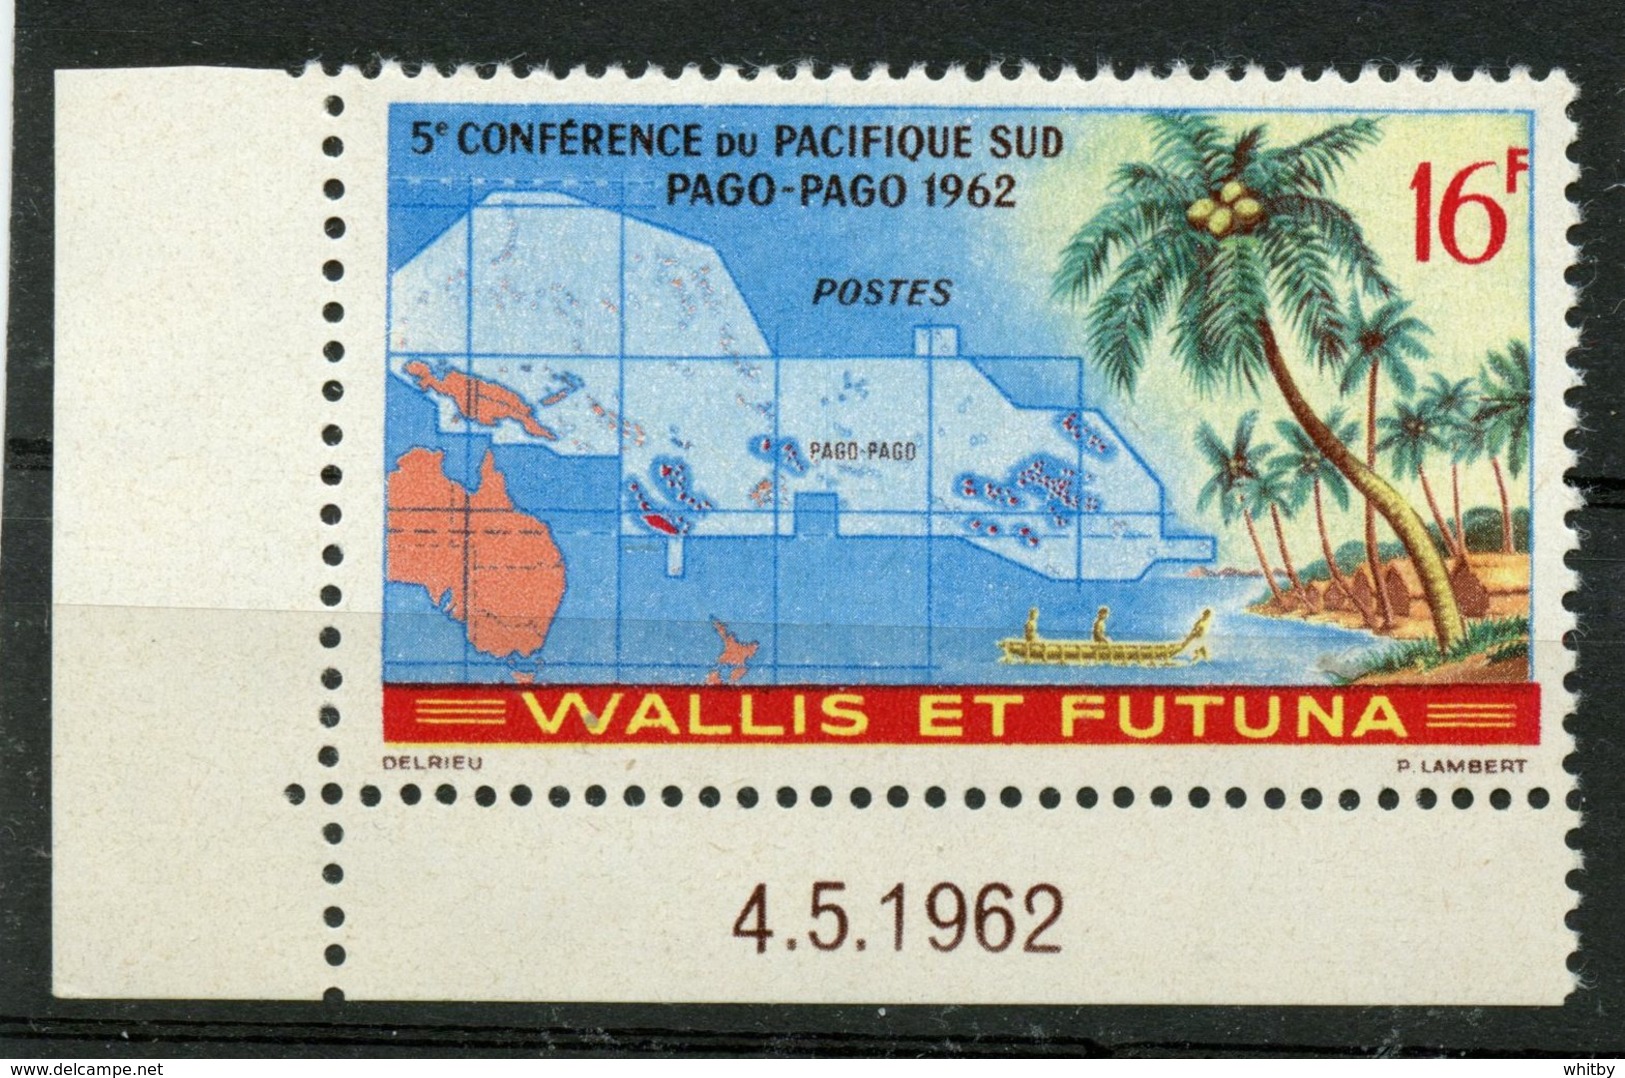 Wallis And Futuna Islands 1962 15f Pacific Confrence Issue #158   MH - Unused Stamps